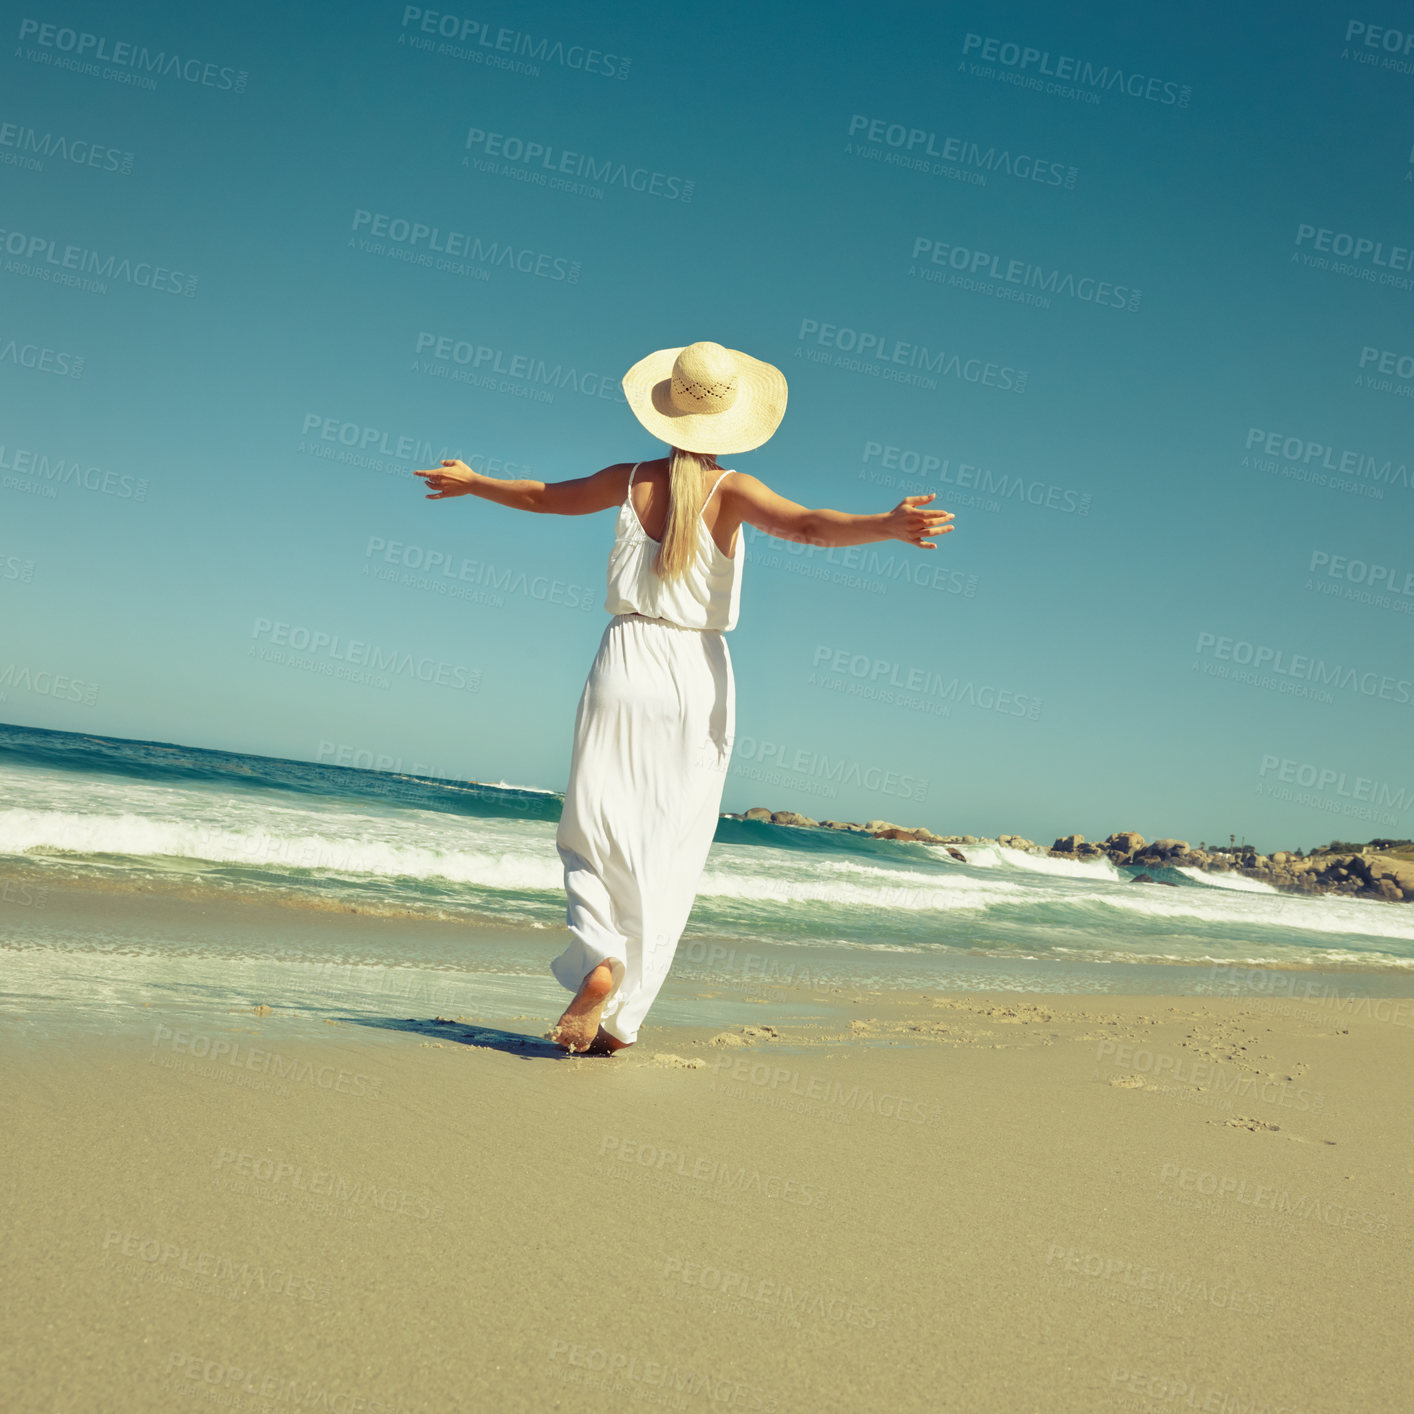 Buy stock photo Rearview shot of a woman enjoying a carefree day at the beach